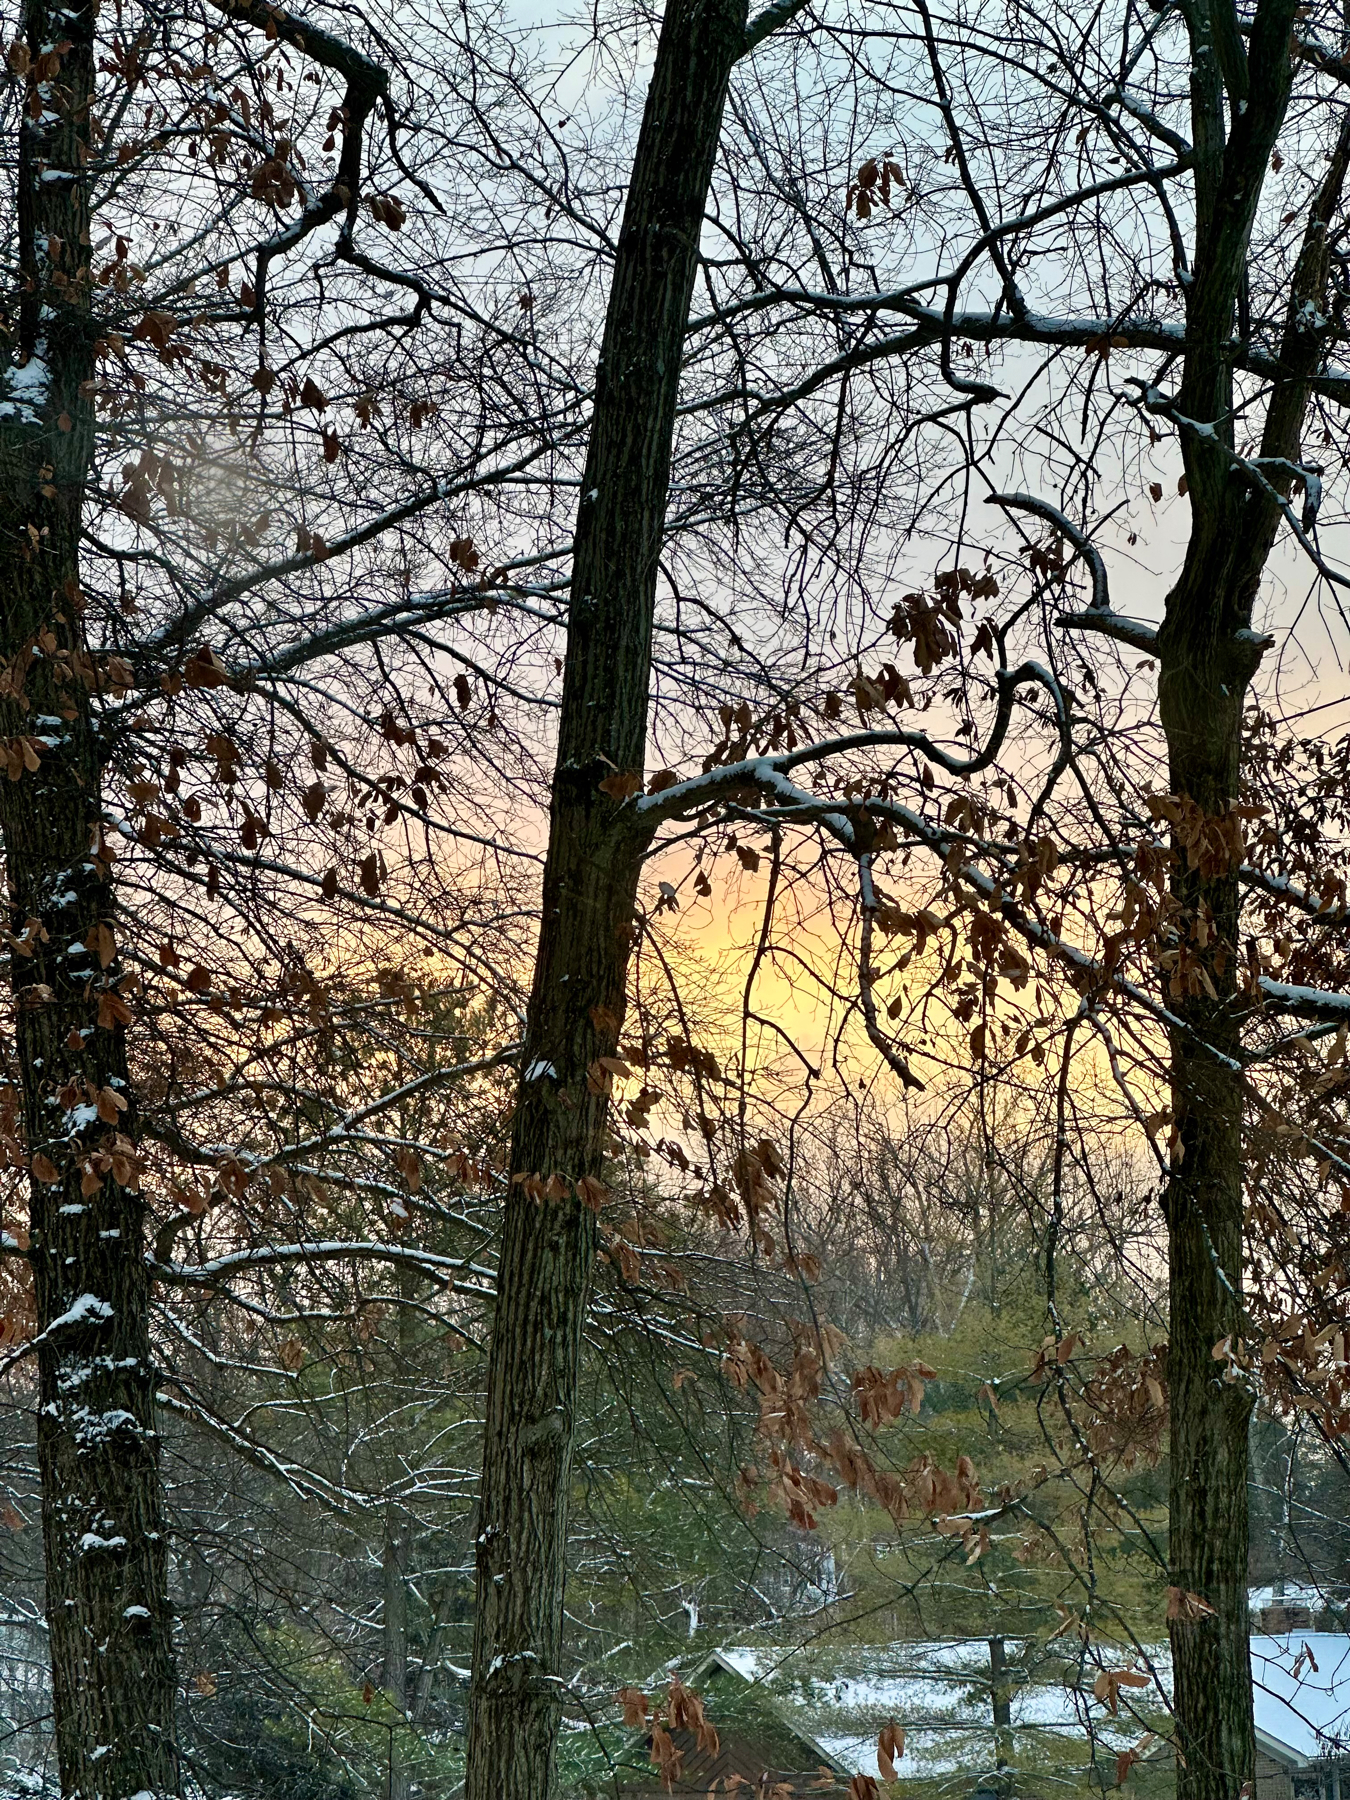 Trees with a mix of bare branches and persistent brown leaves against a golden-hued sunset sky, with a hint of snow on branches and the ground.